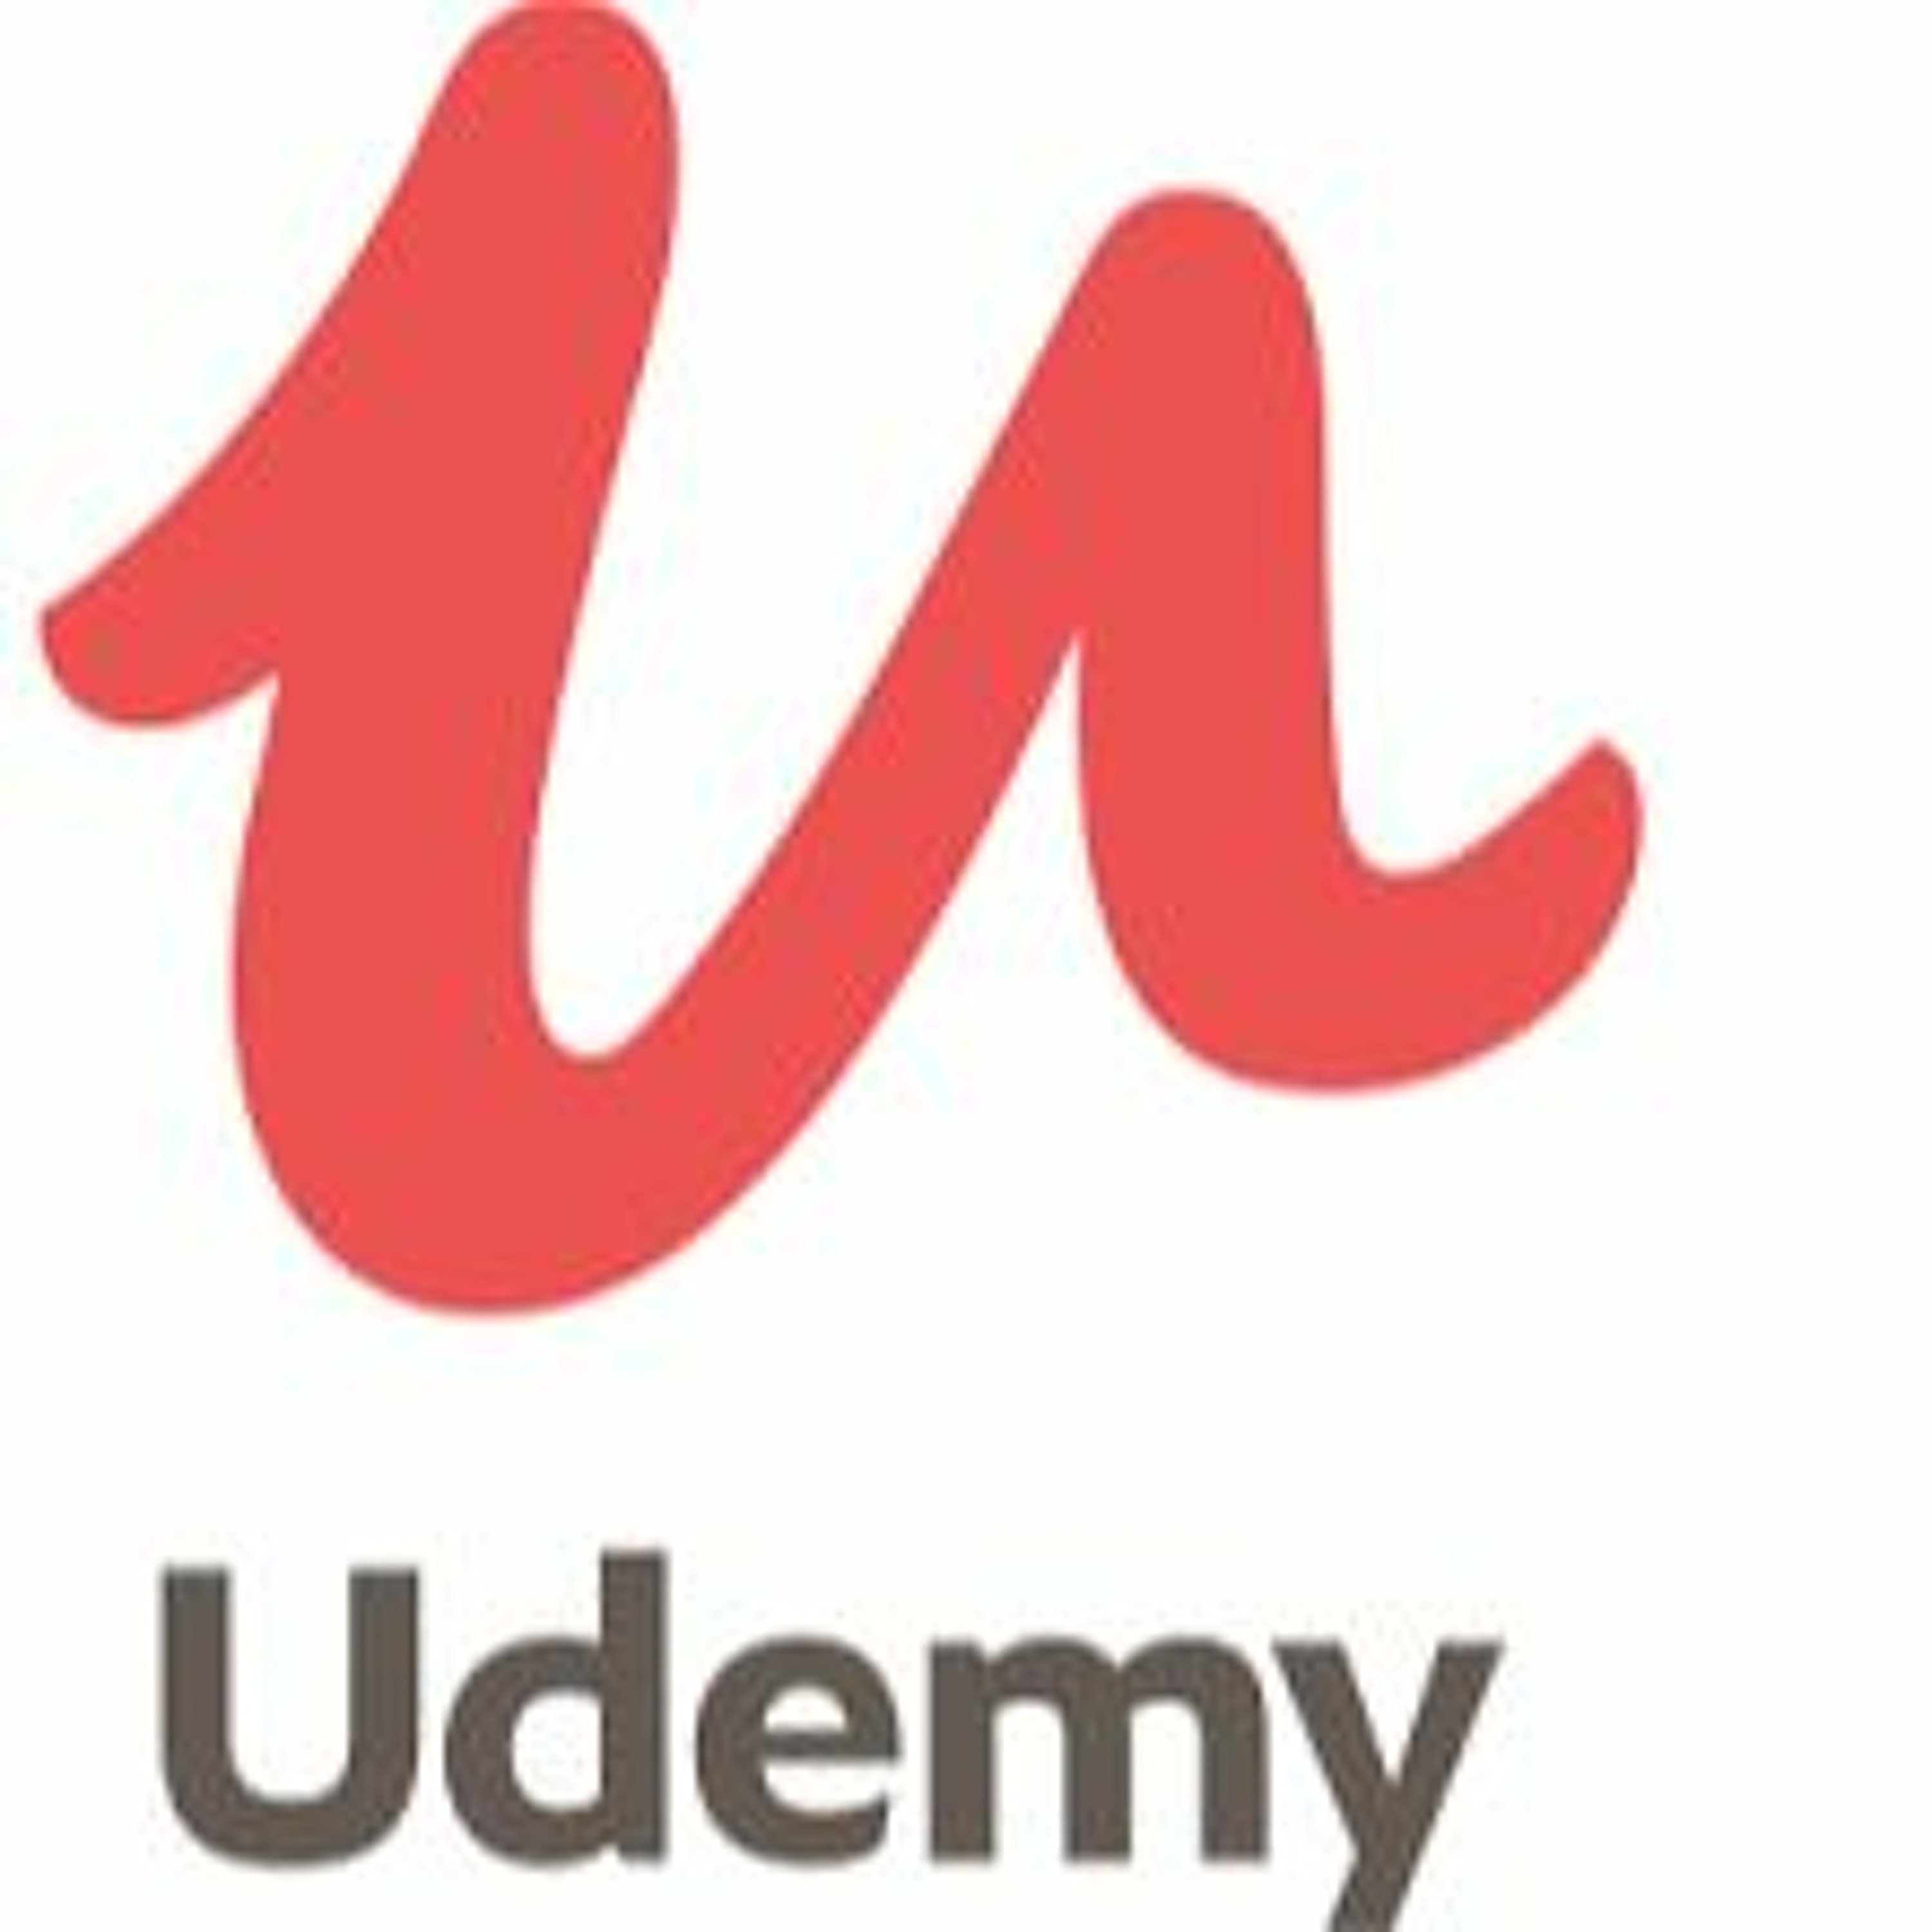 Udemy Leadership Coaching Event - How to Build and Coach a Remote Team